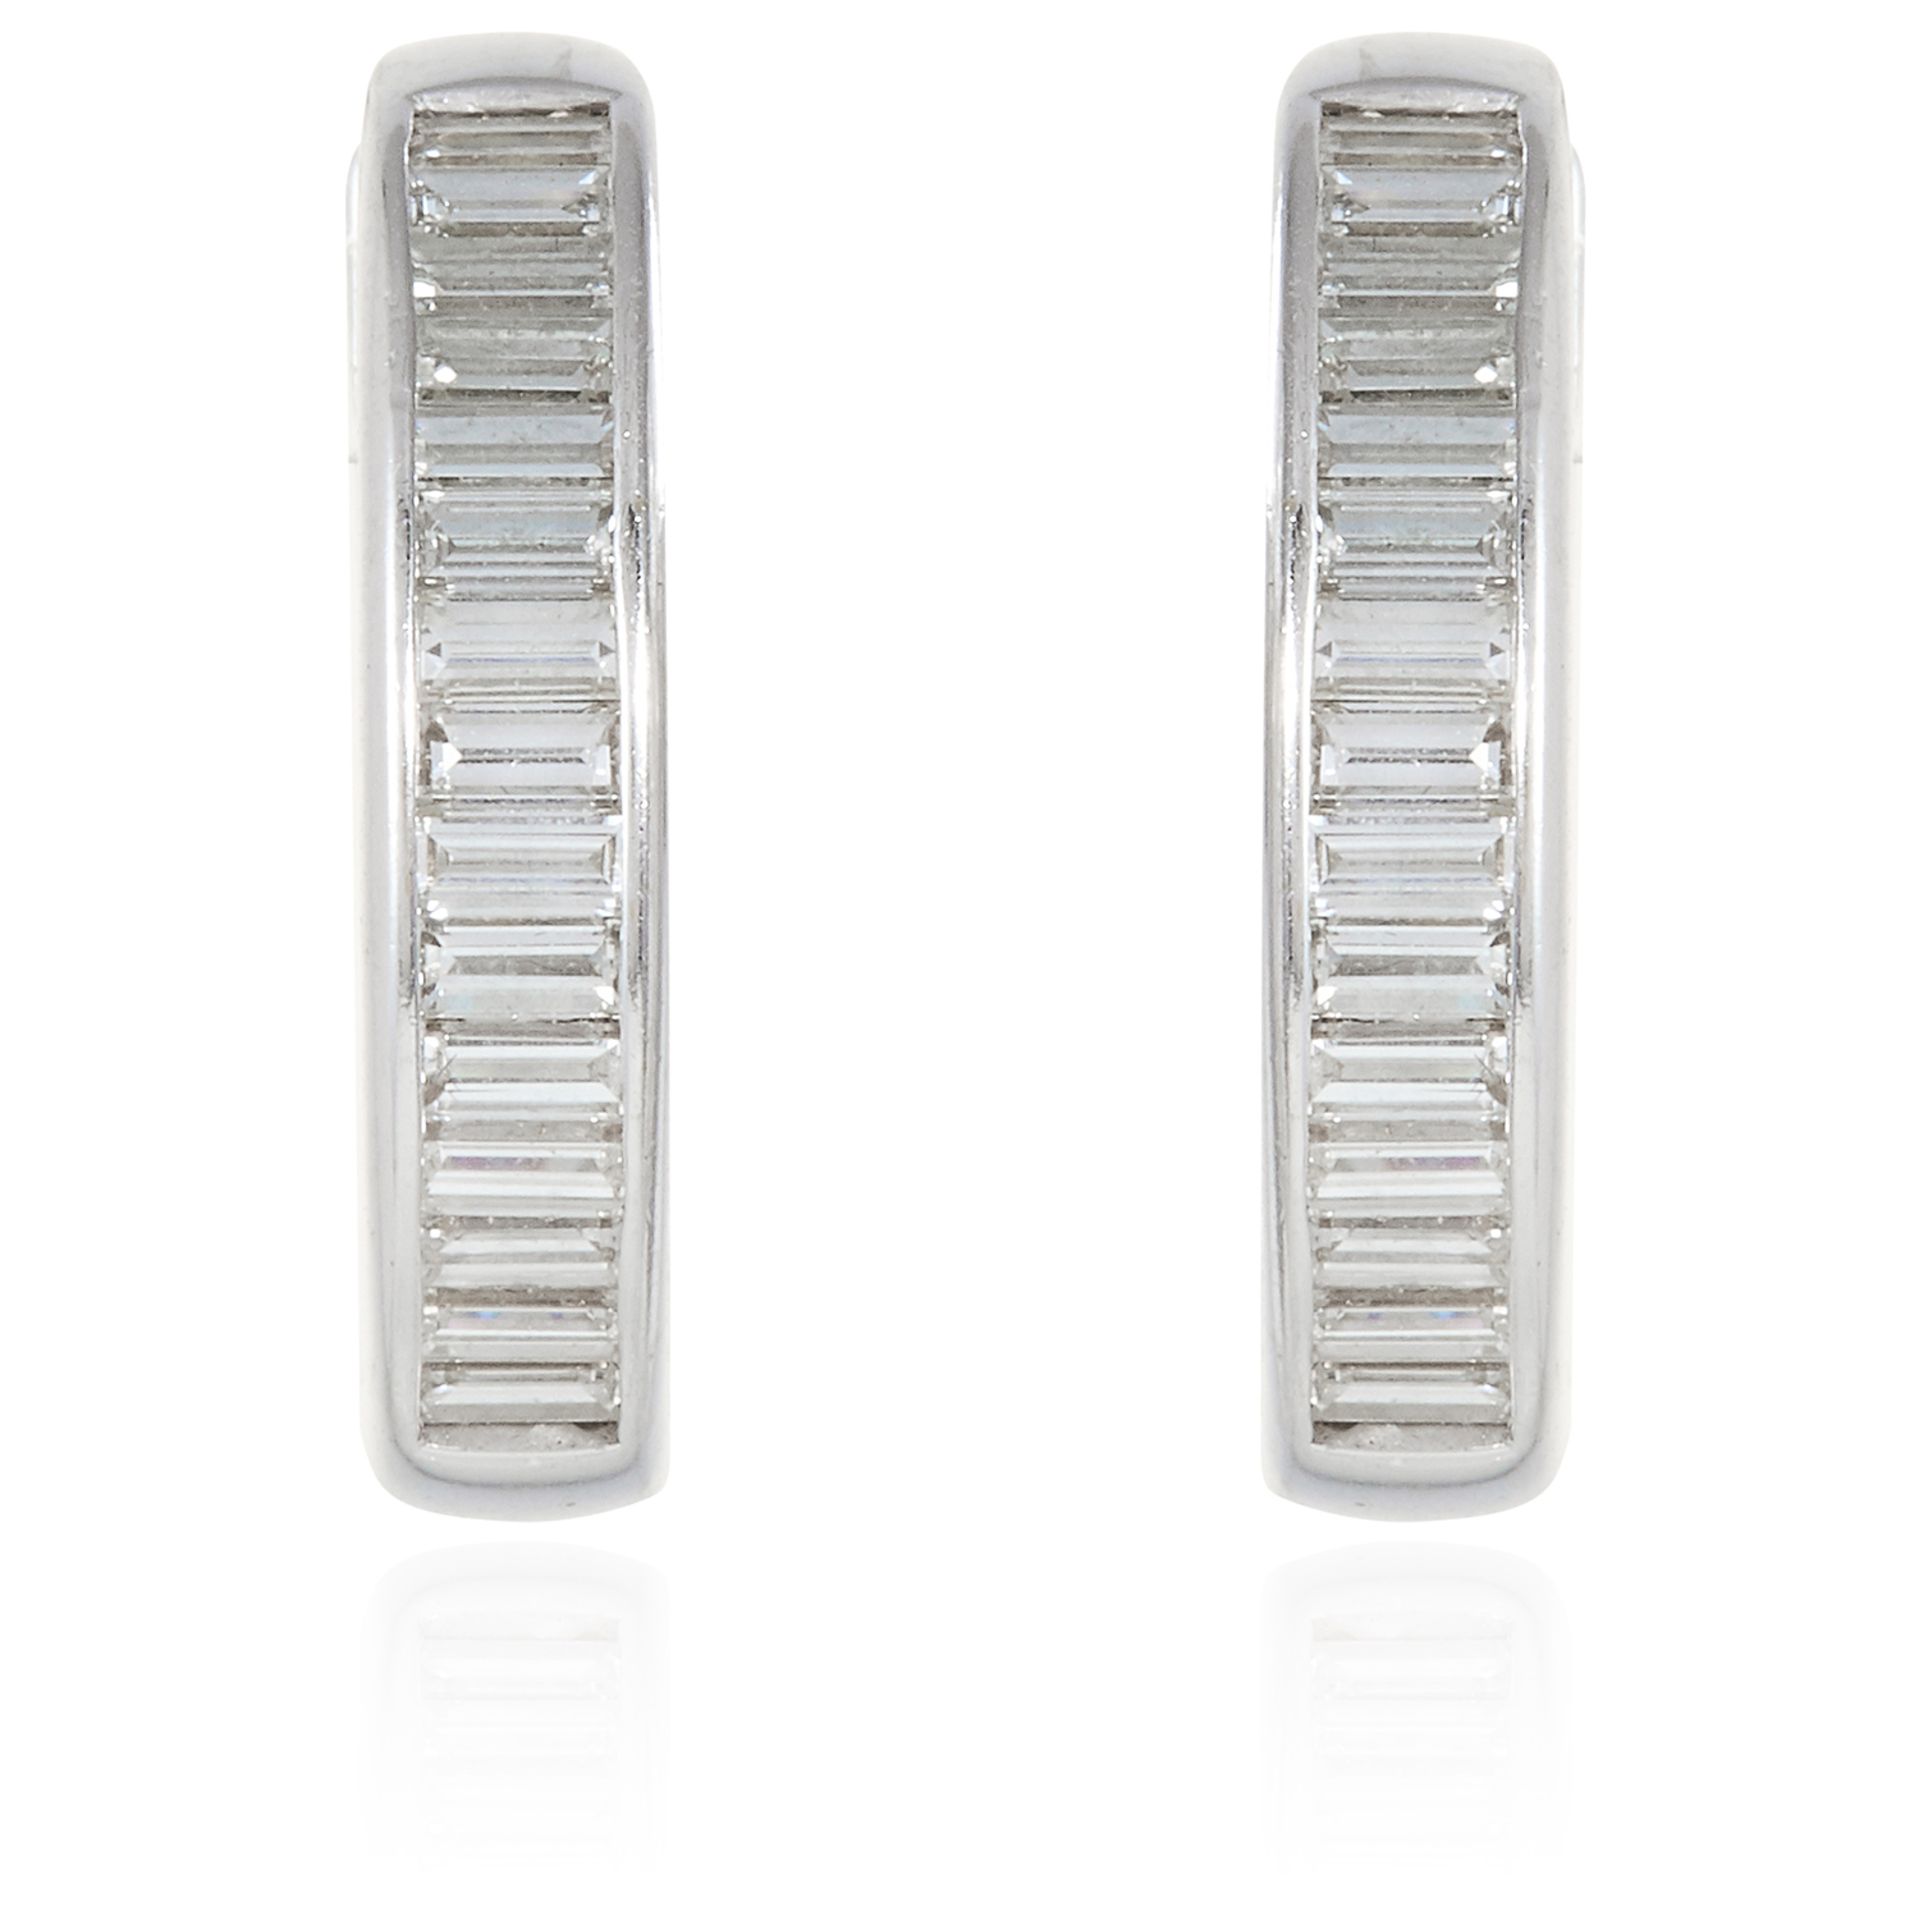 A PAIR OF DIAMOND HOOP EARRINGS in 18ct white gold, set with baguette cut diamonds, British